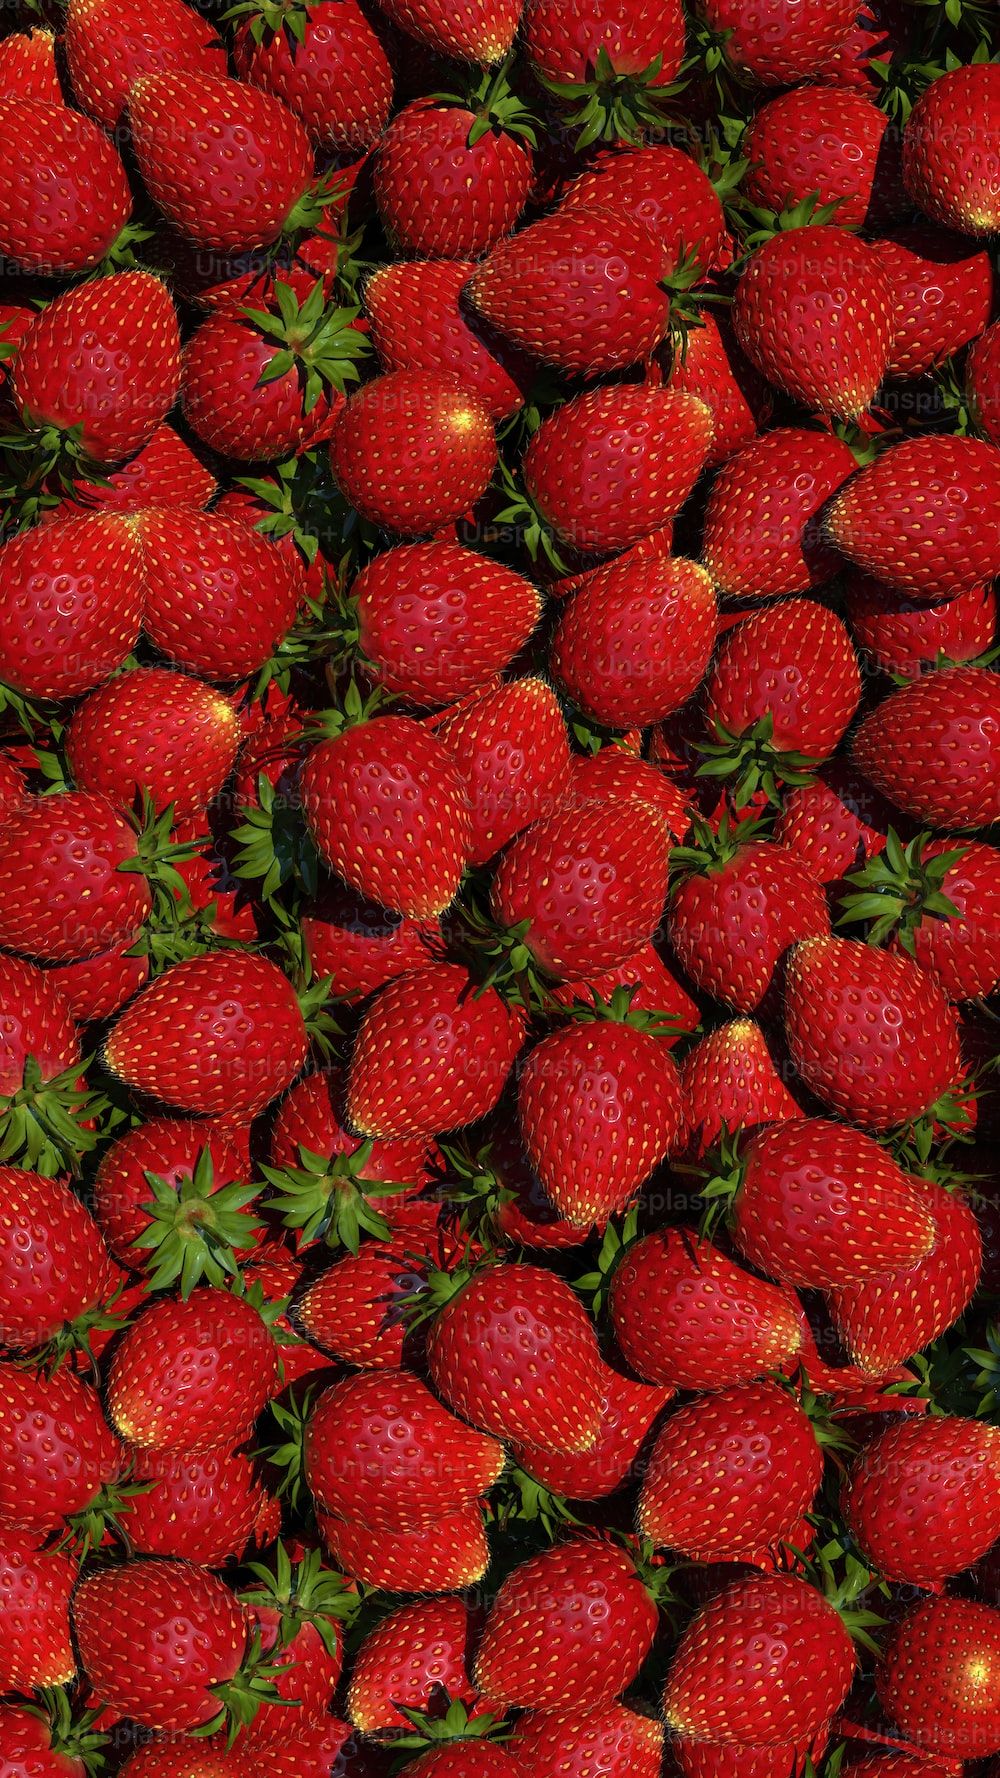 Red Fruit Picture. Download Free Image